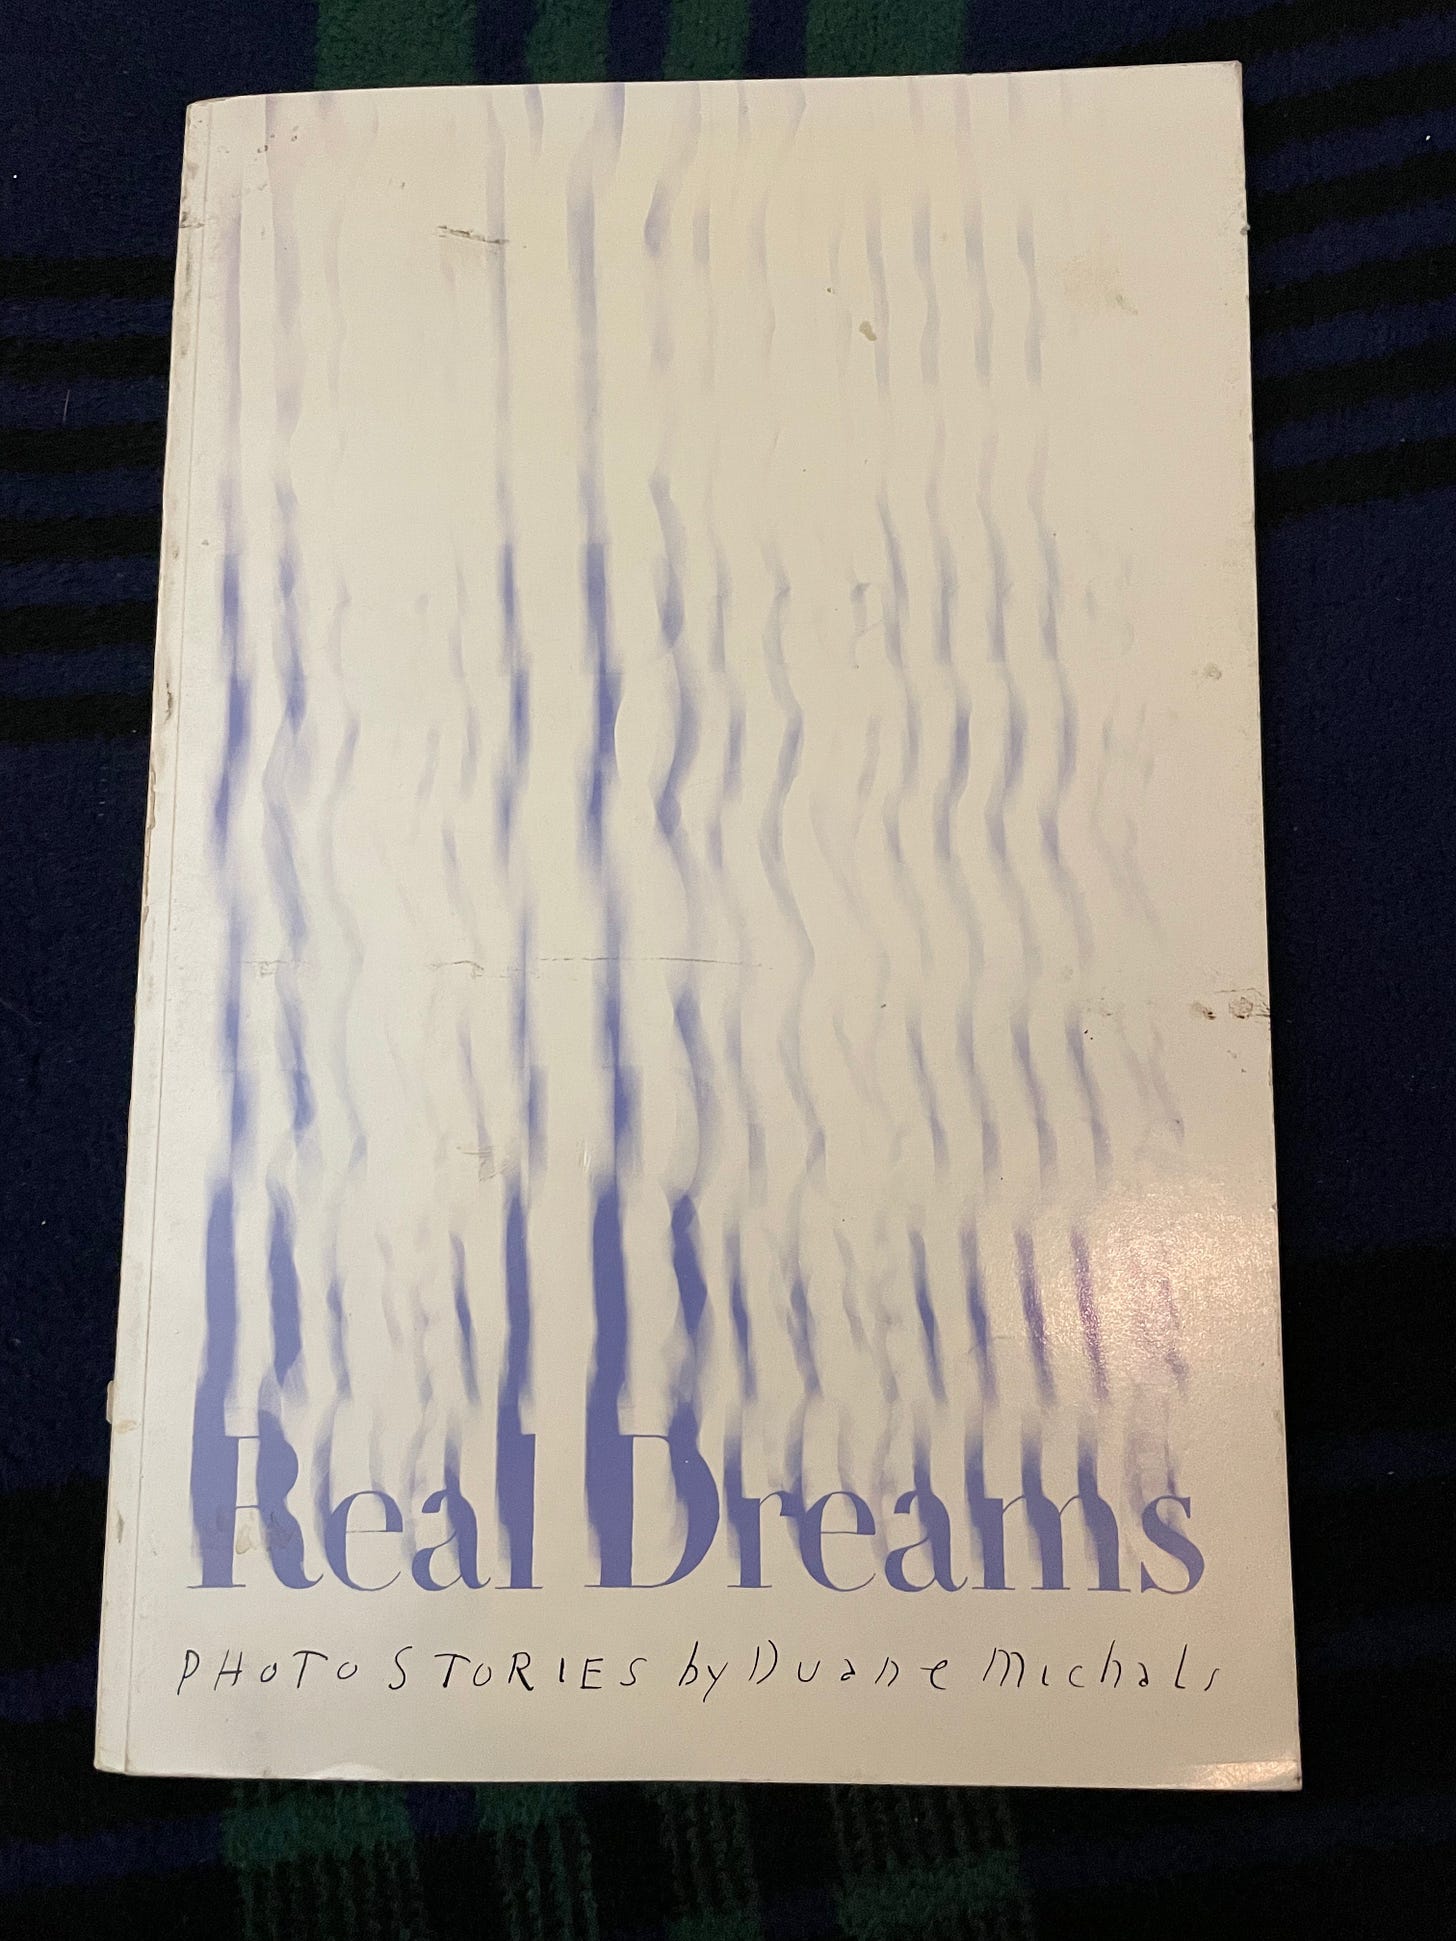 Photo of the cover of the book Real Dreams, by Duane Michals